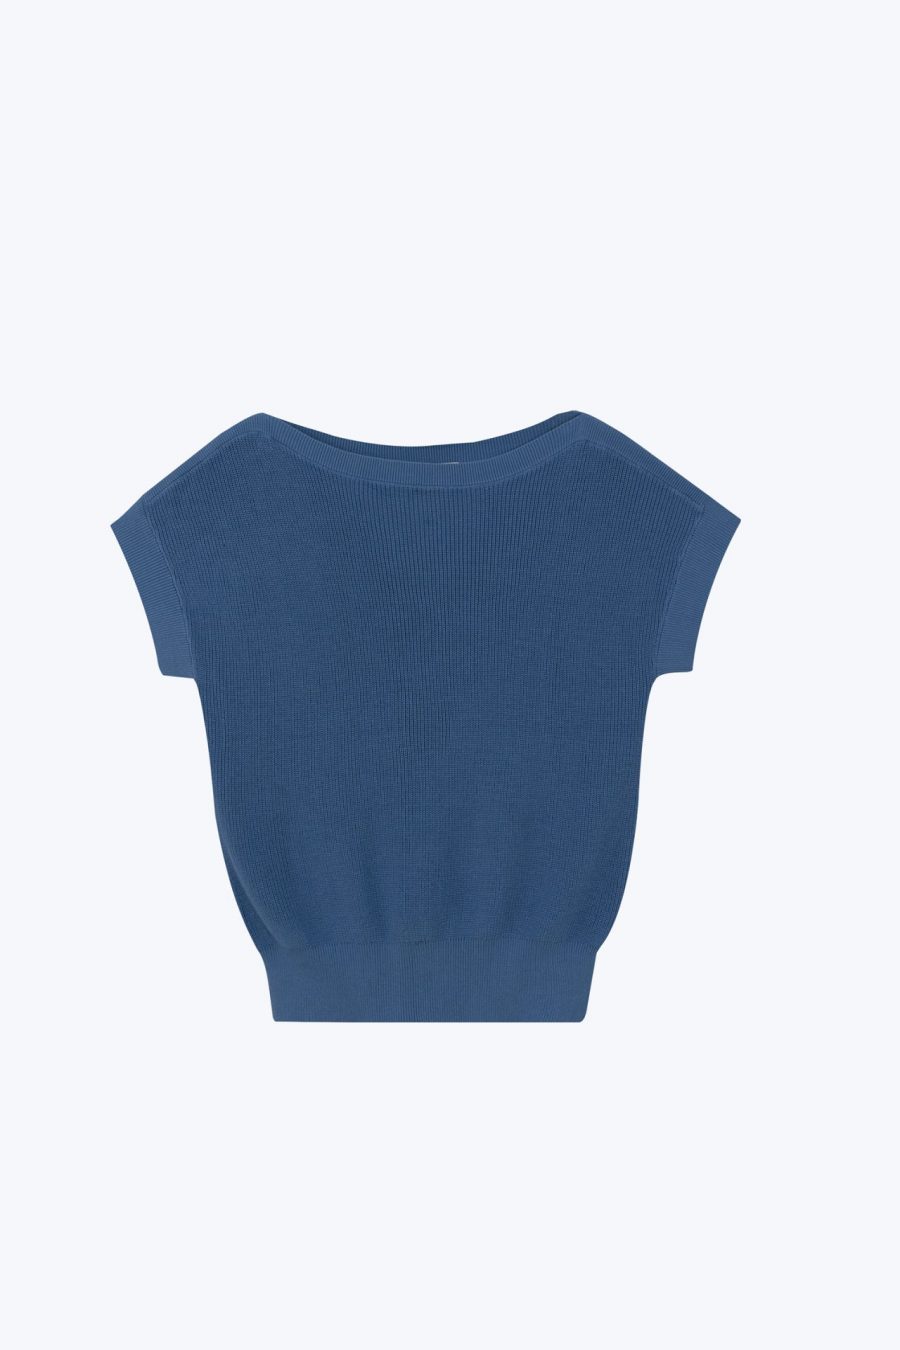 CK001133J Knitted Wide Neck Top DUSTY BLUE